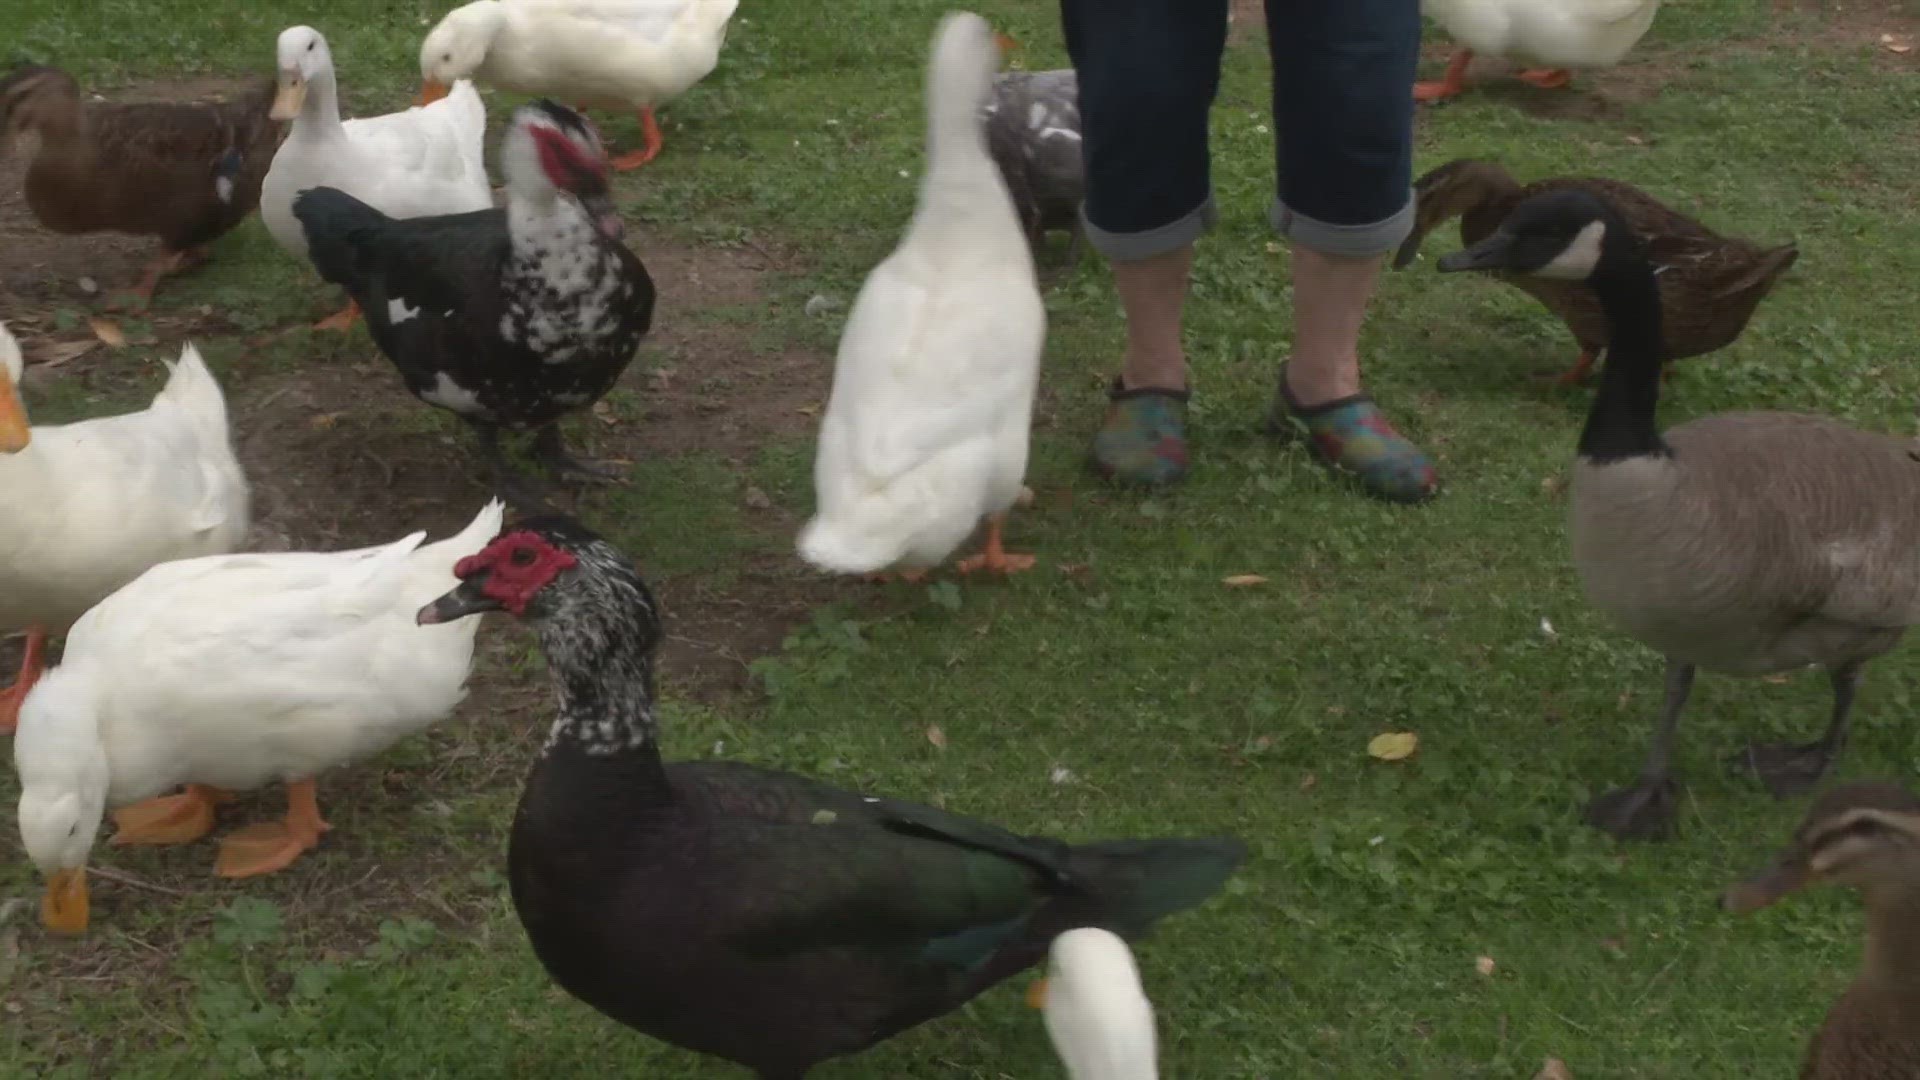 Several dead geese have been found at the Mayor Anne Rudin Peace Pond in Land Park, raising concerns that there could be an outbreak of avian influenza in the area.